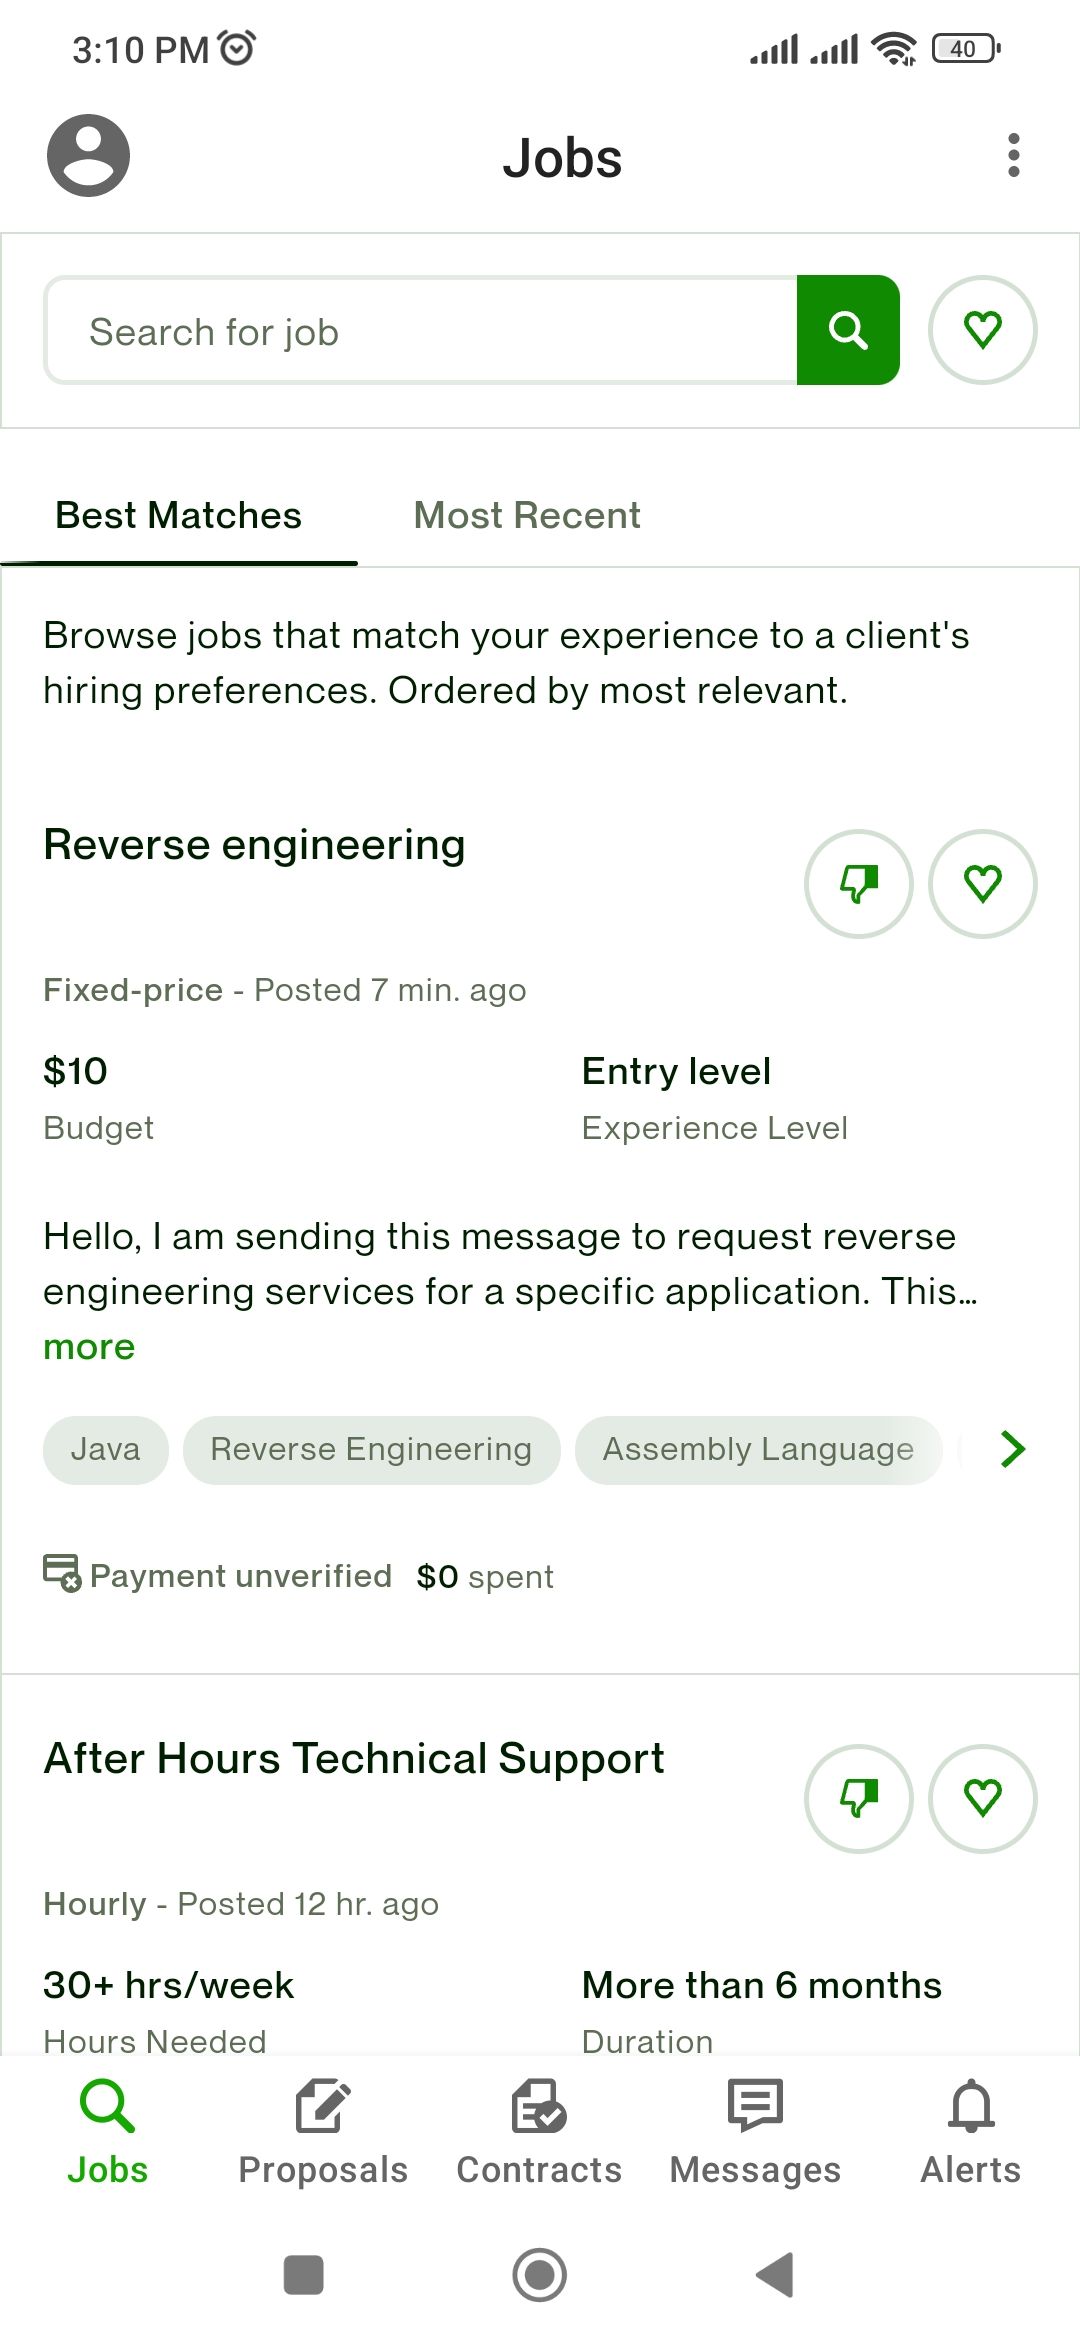 Jobs page in the Upwork app